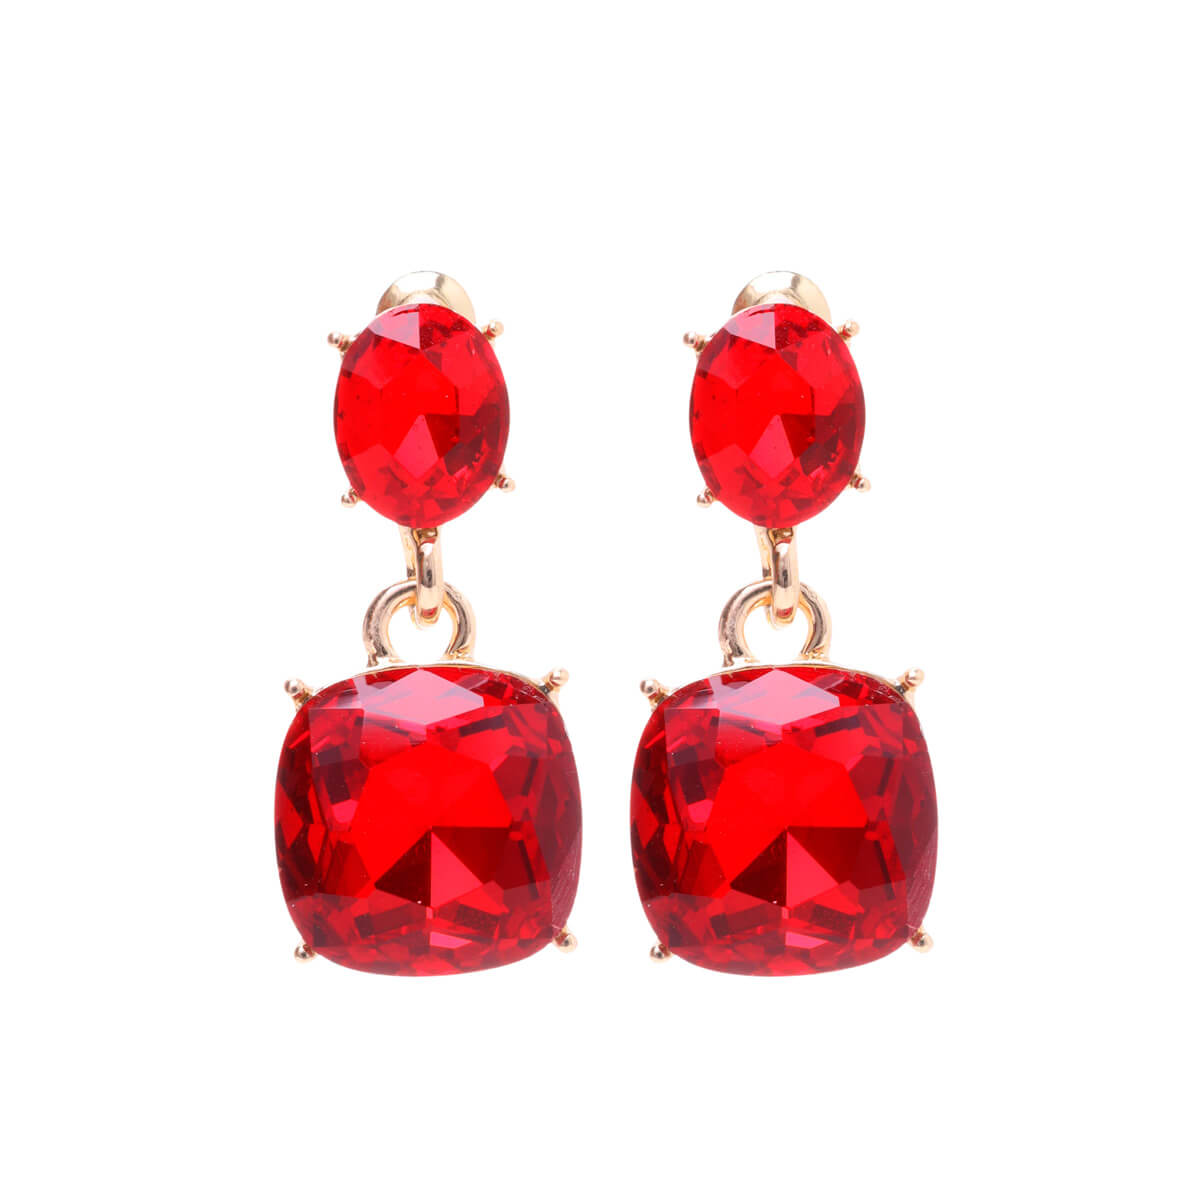 Two-piece hanging earrings for celebrations